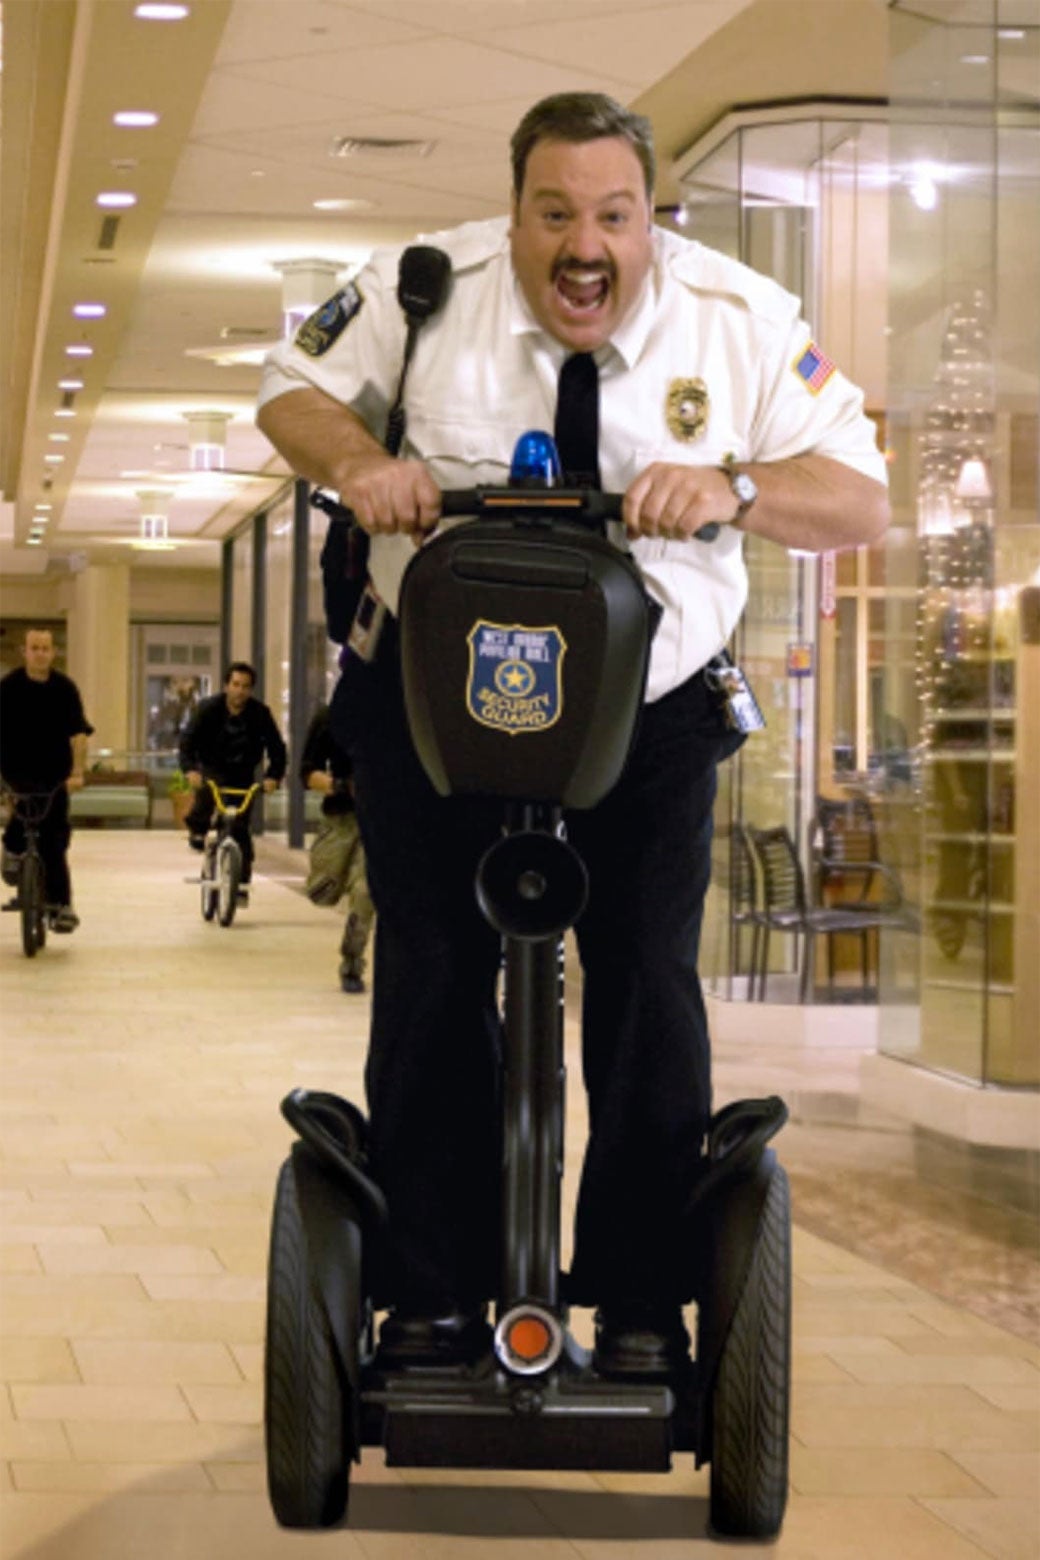 Kevin James rides a Segway in a scene from Paul Blart: Mall Cop.